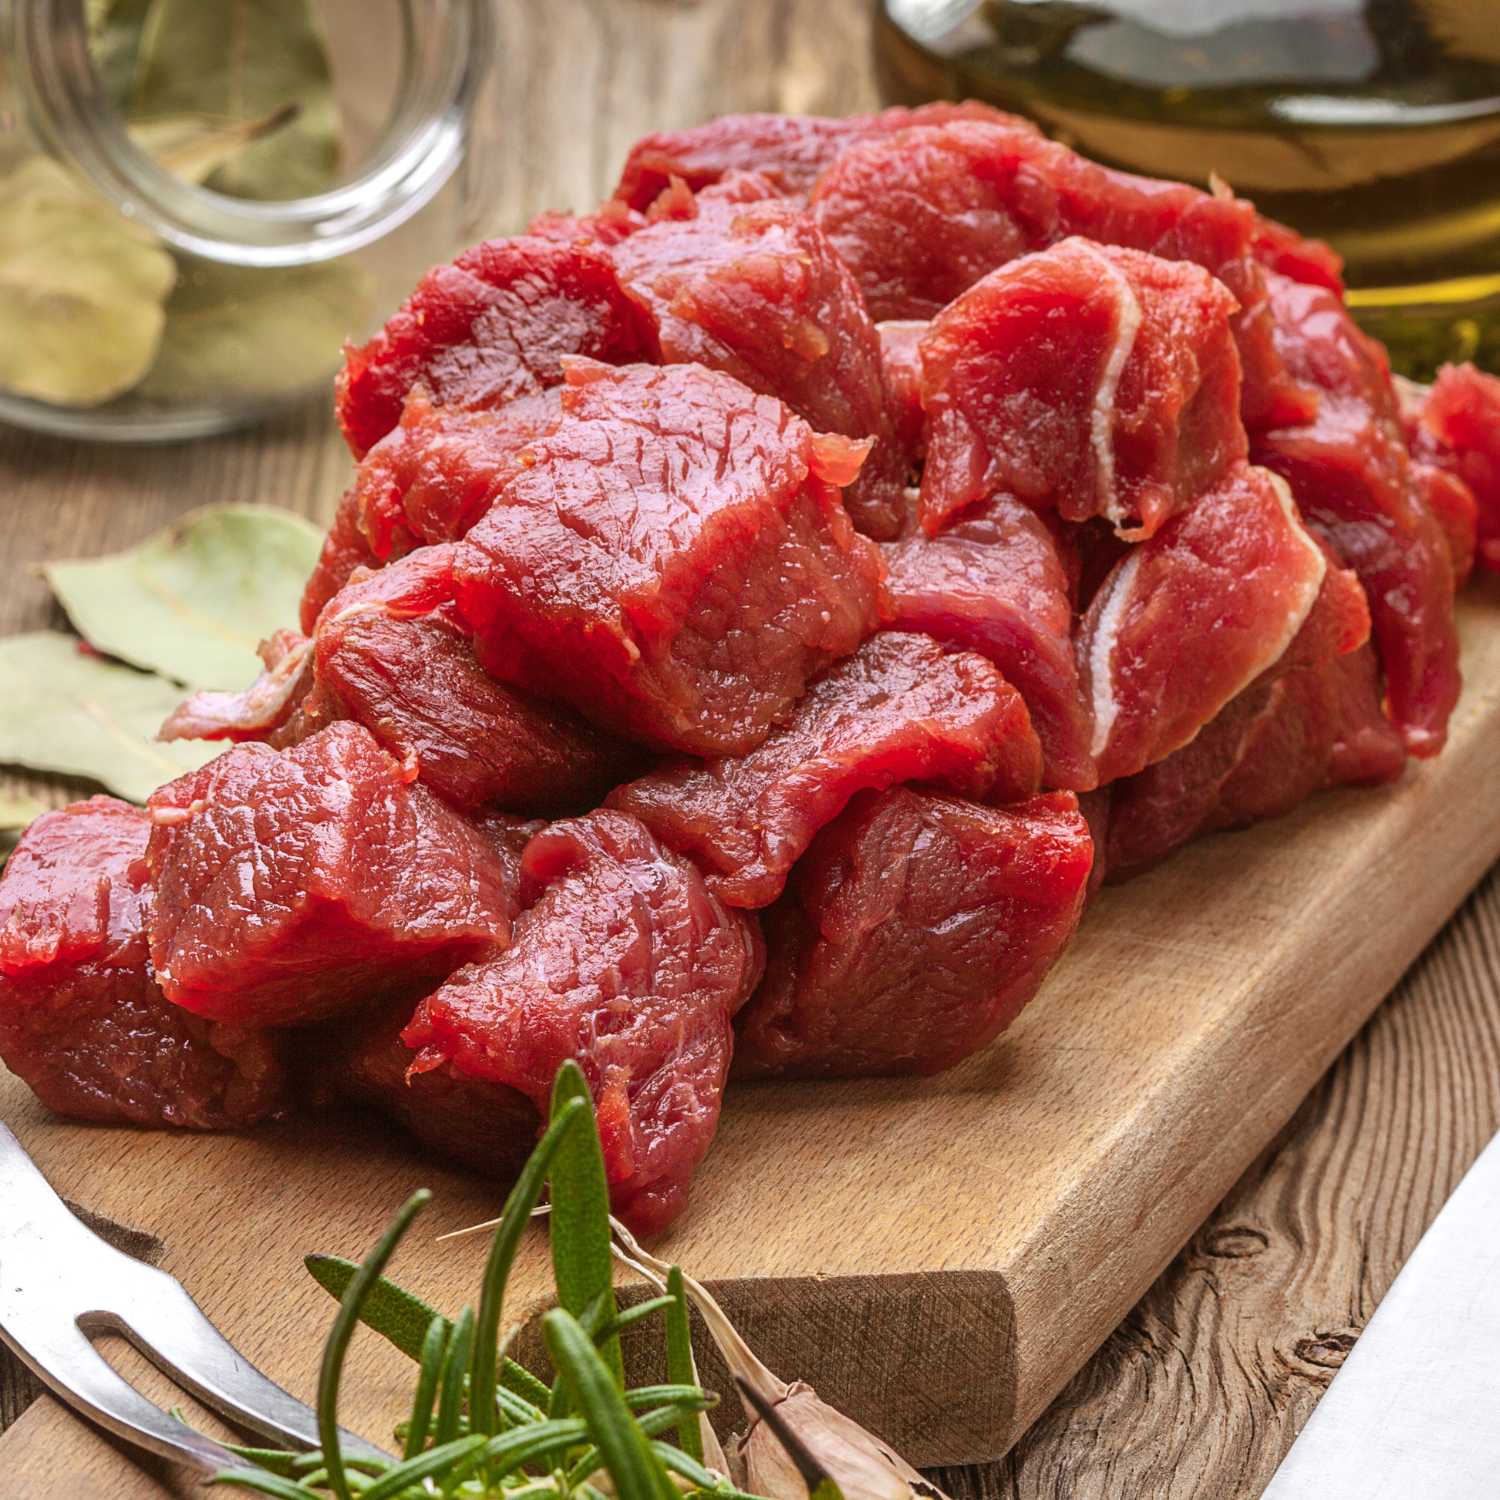 Unlock the Flavor of Hong Kong: How to Cook the Best Beef with Meat King's Grass-Fed Cuts